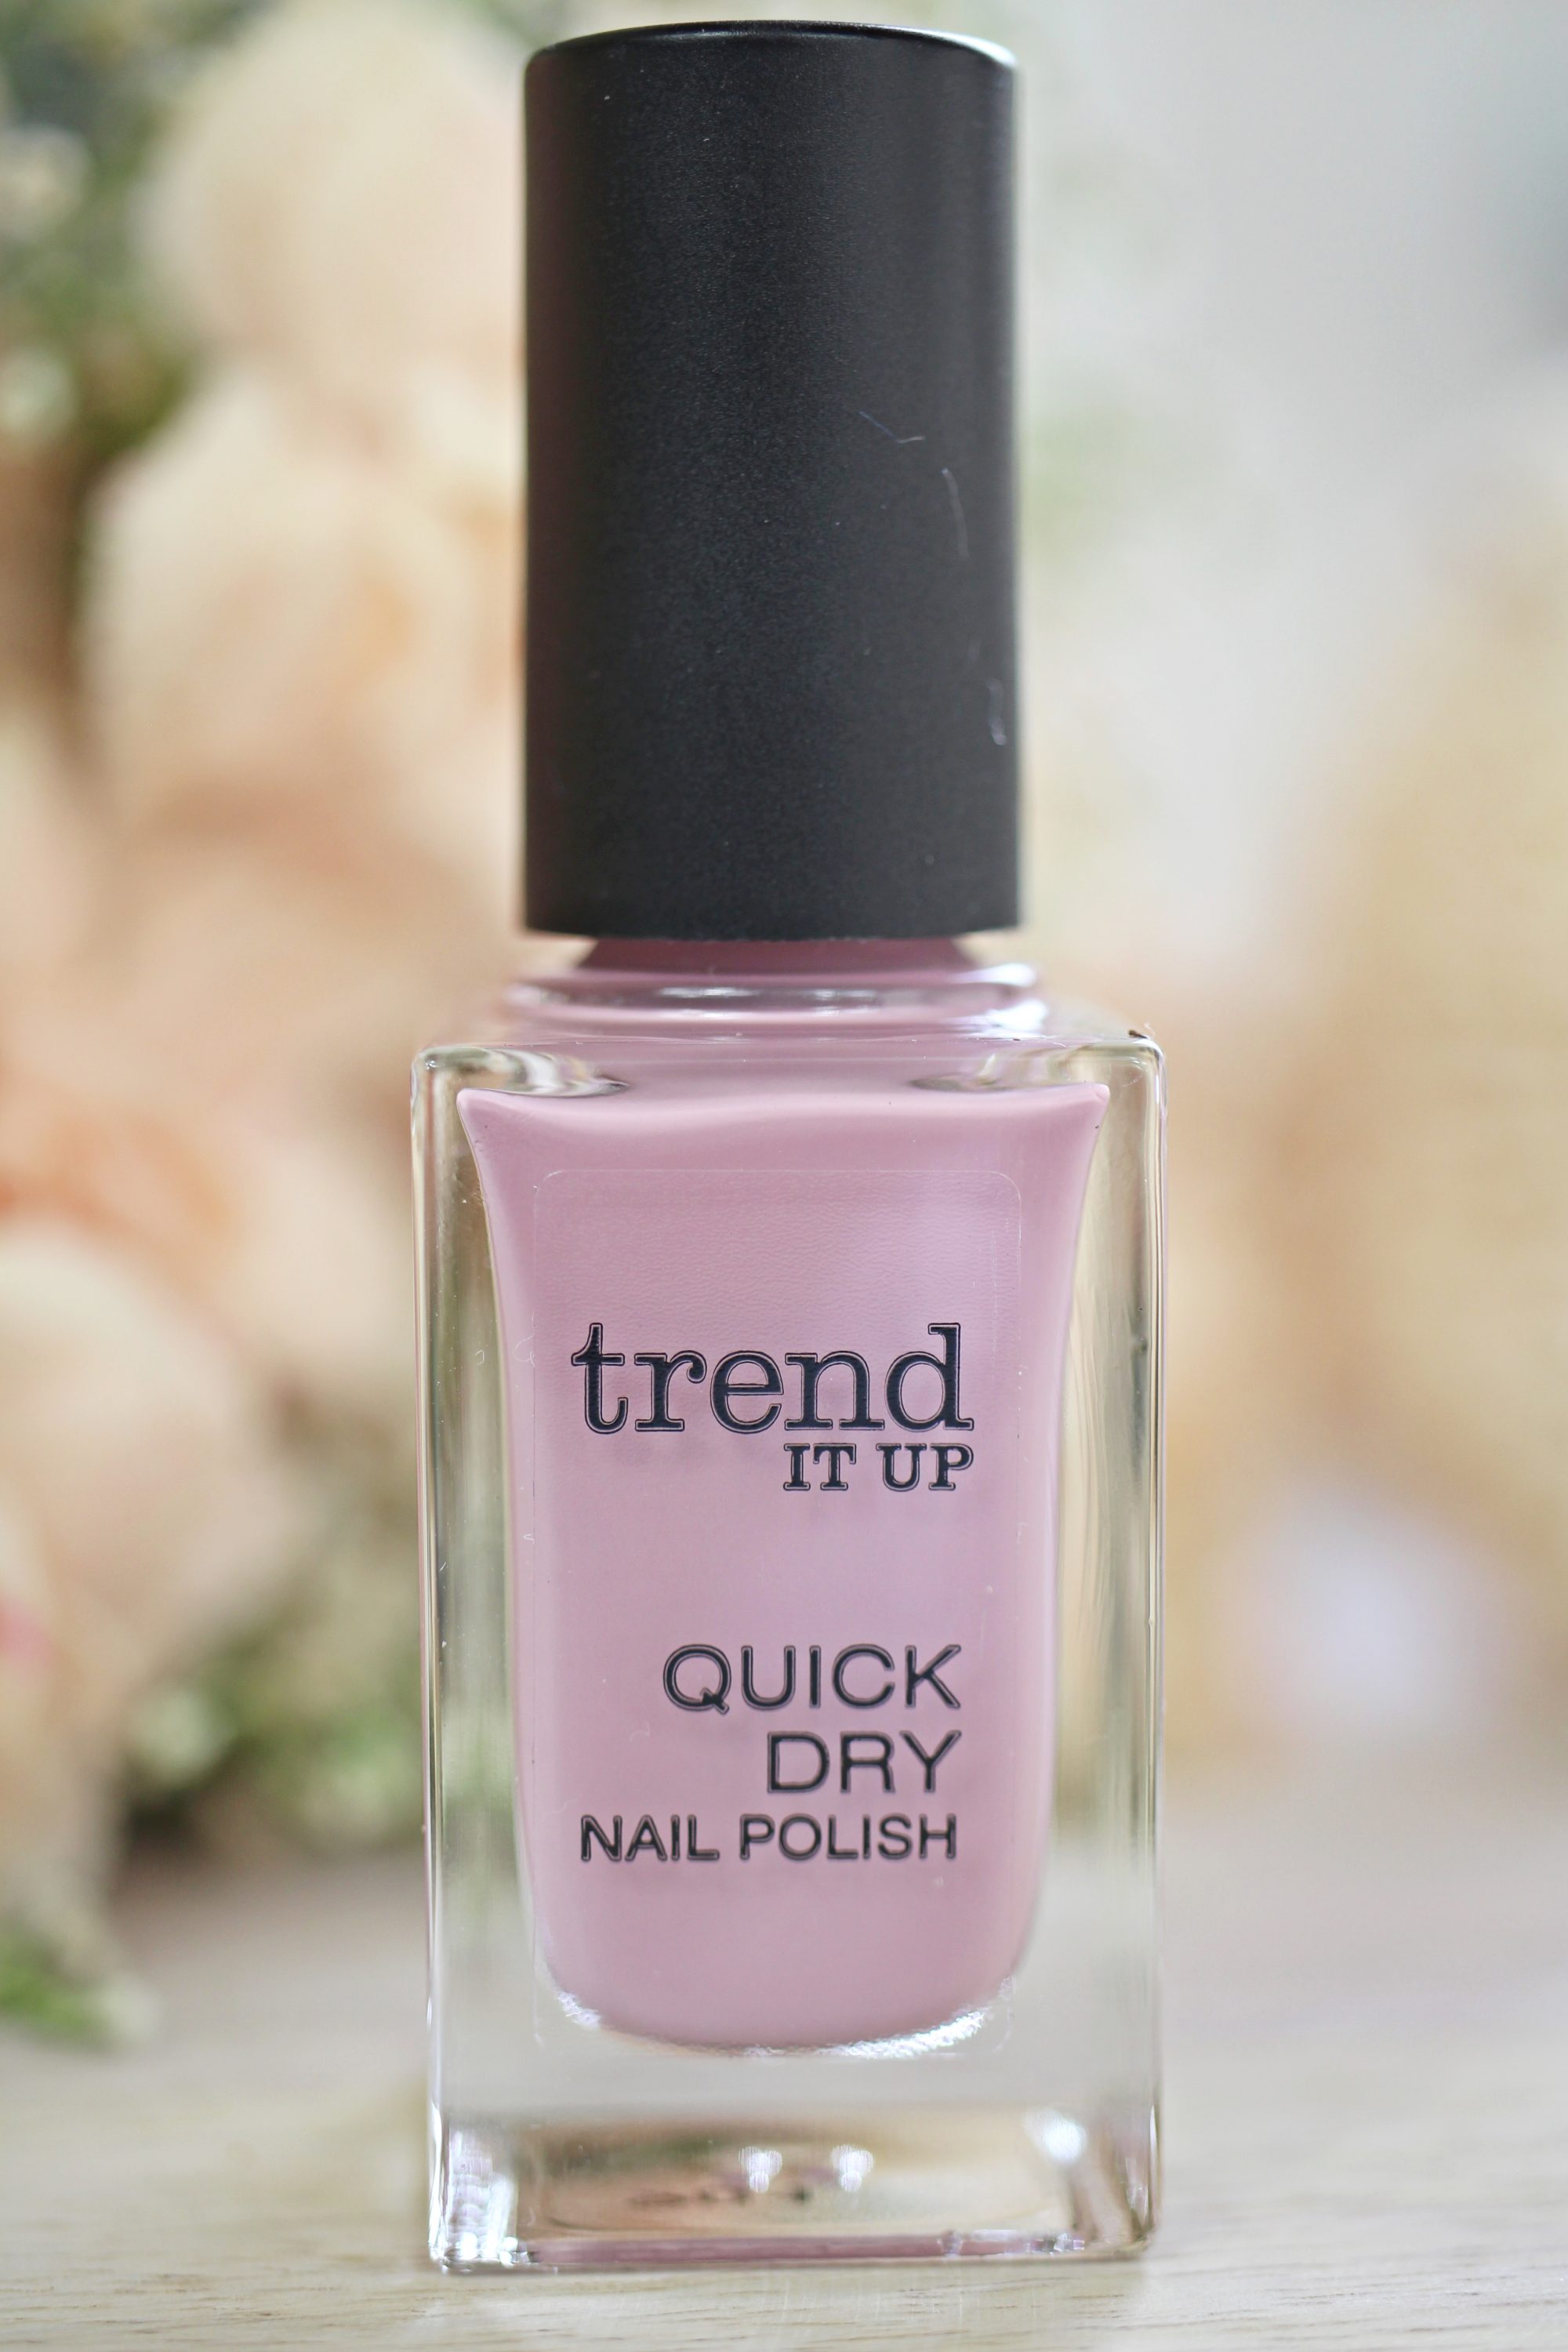 trend IT UP Nagellack Quick Dry Nail Polish berry 065, 8 